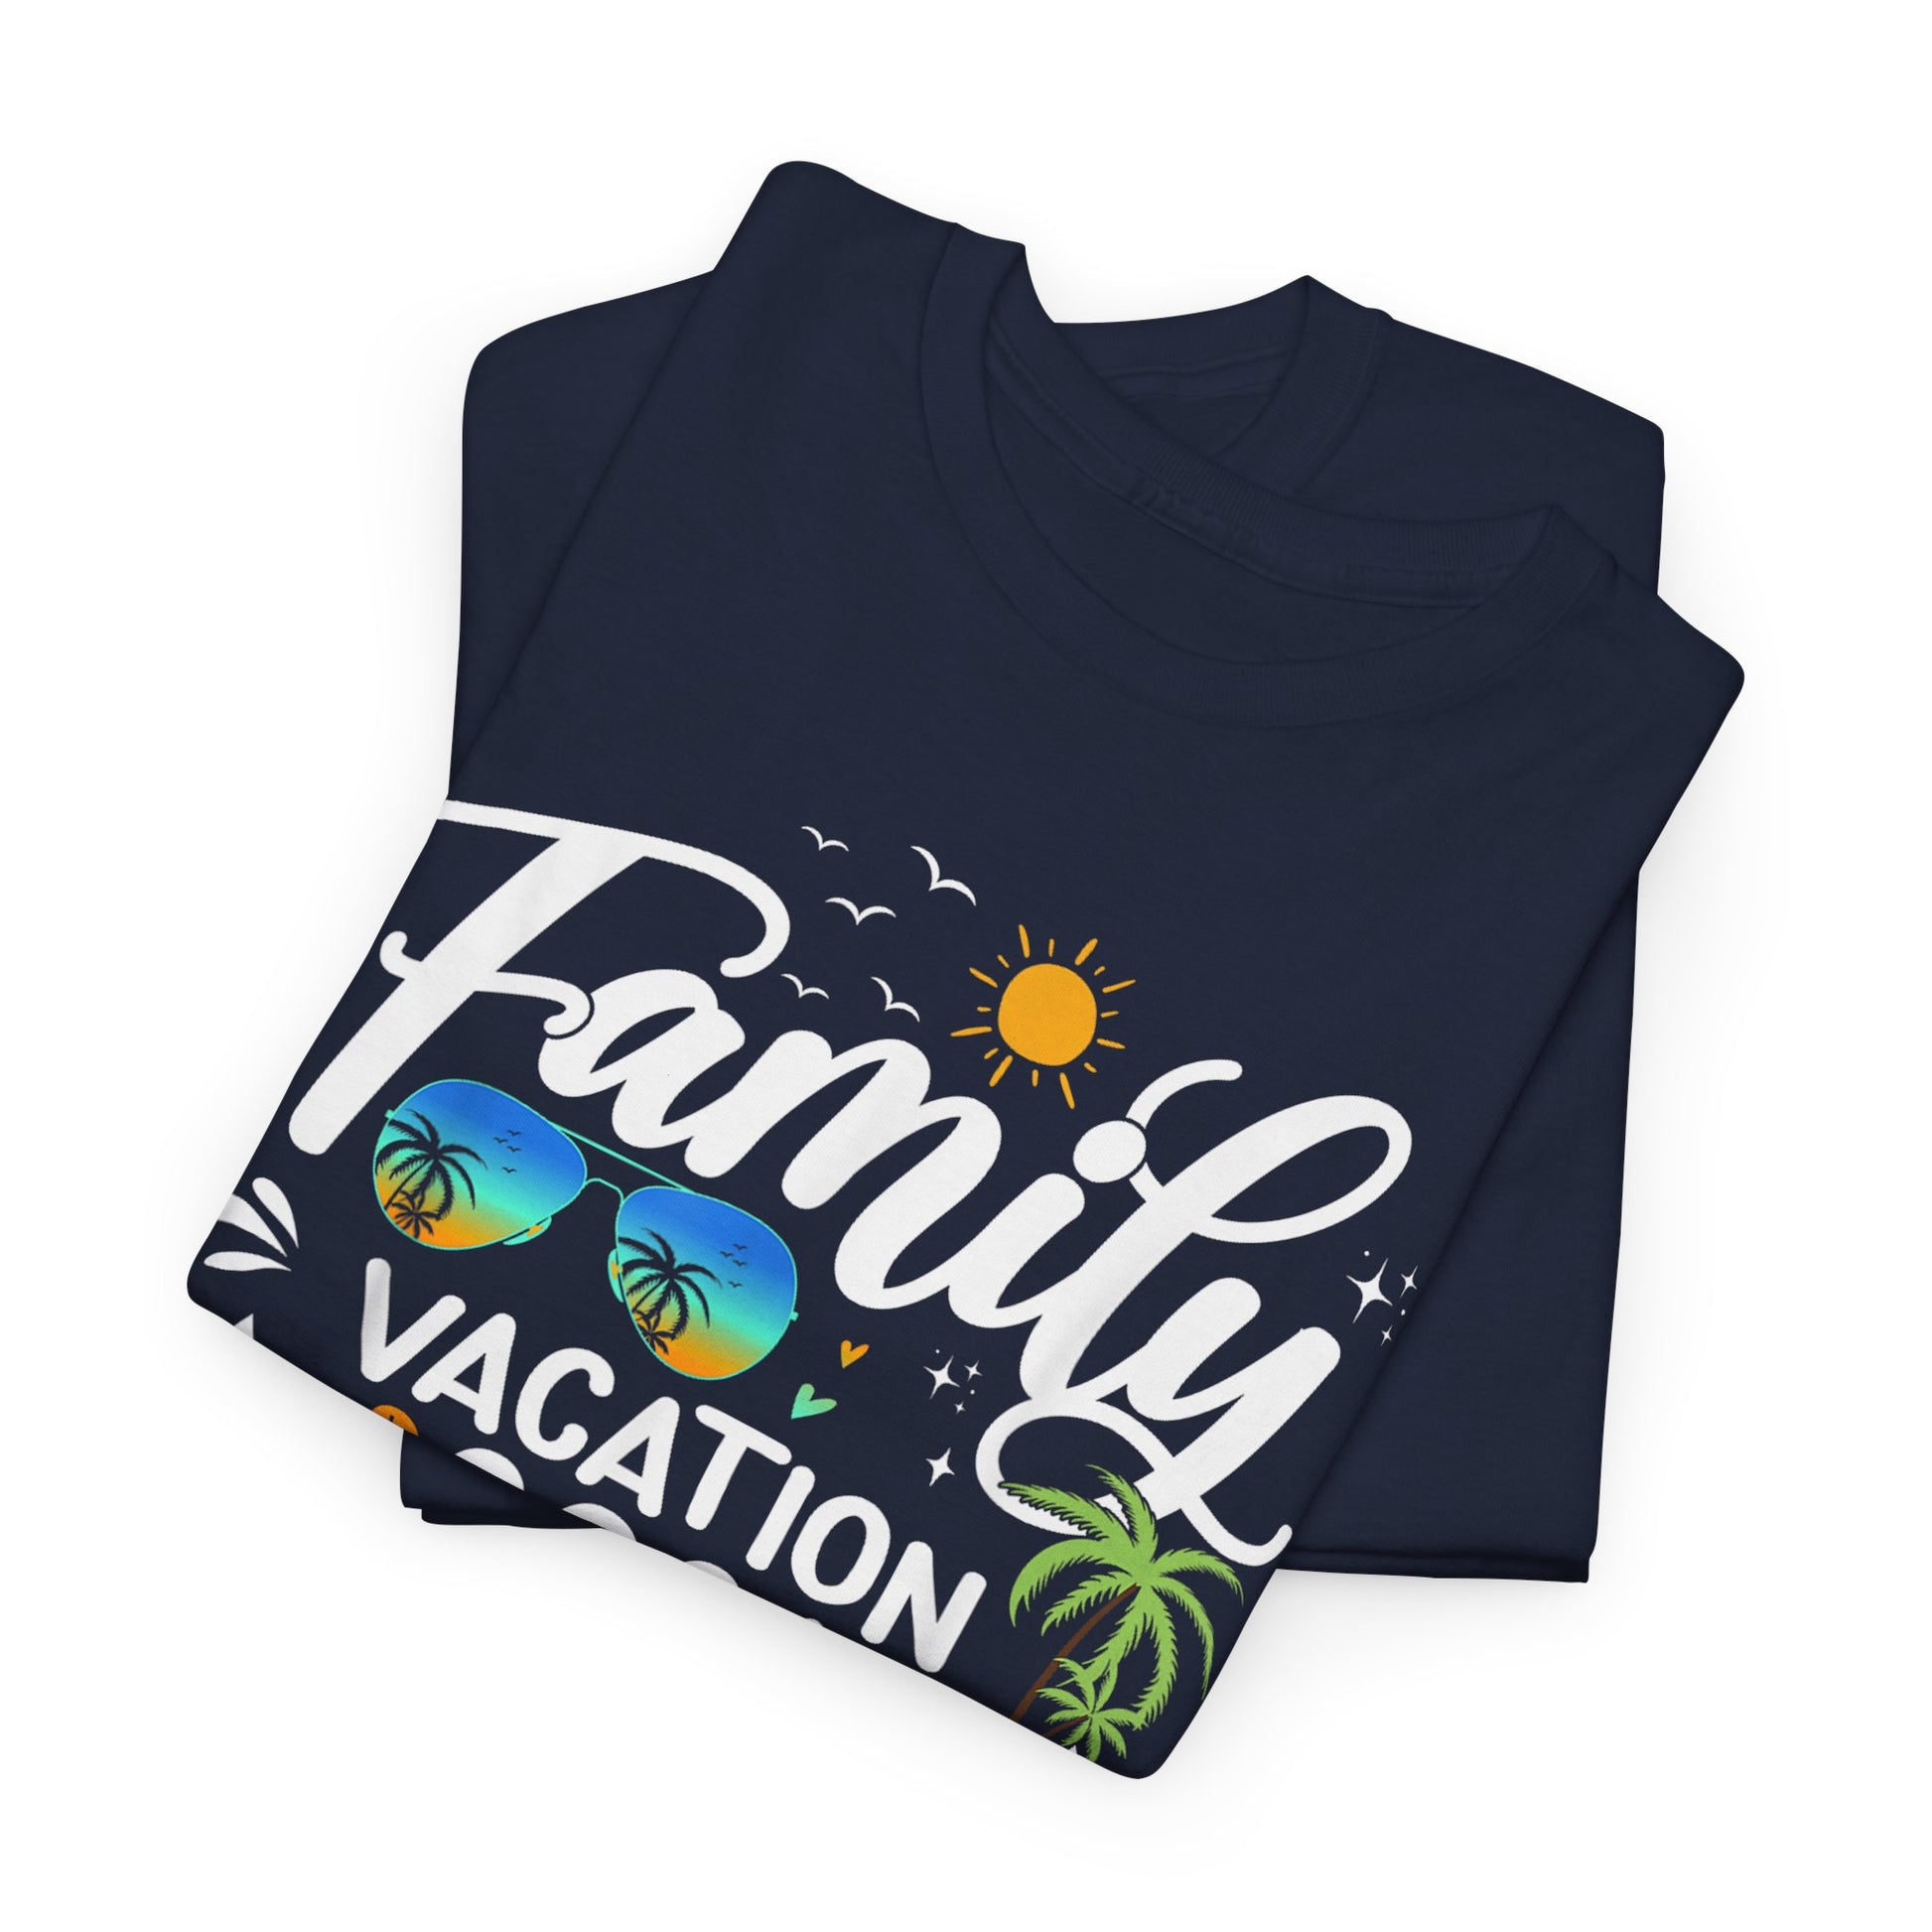 Family Vacay Making Memories - Craftee Designs & Prints 